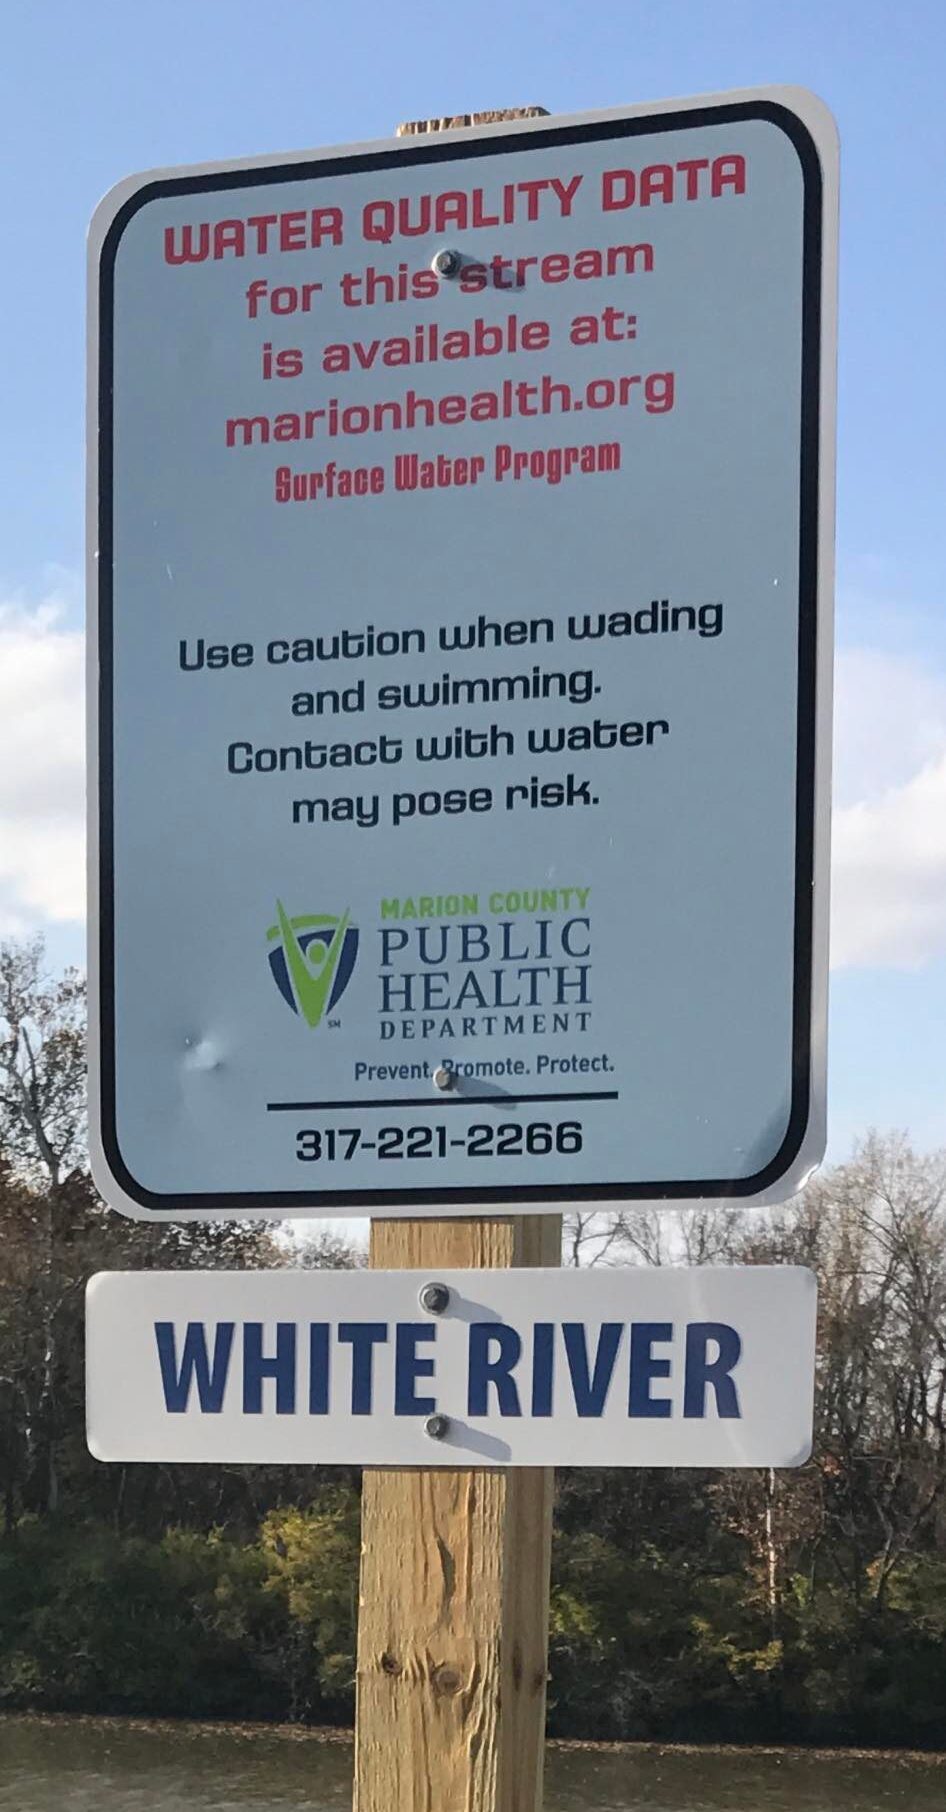 Sign posted in front of the White River that reads: Water quality data for this stream is available at marionhealth.org Surface Water Program Use caution when wading and swimming. Contact with water may pose risk. Marion County Public Health Department Prevent. Promote/ Protect. 317-221-2266